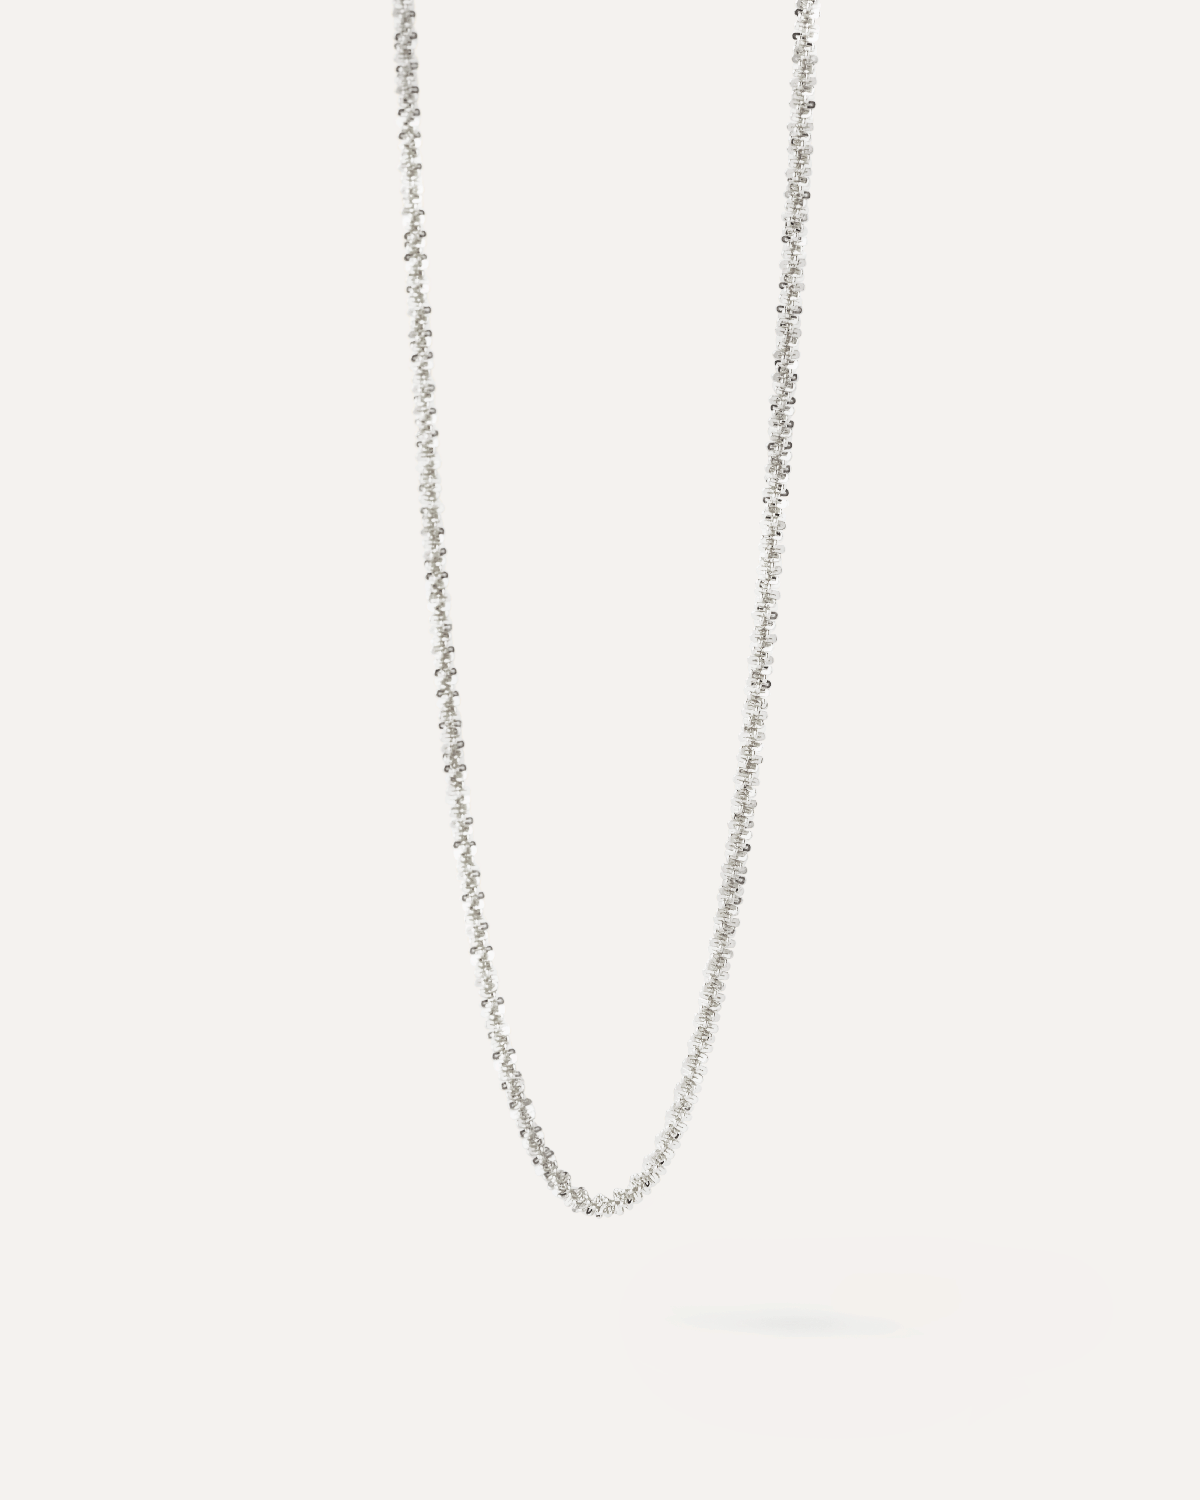 2024 Selection | Sparkle silver chain necklace. Get the latest arrival from PDPAOLA. Place your order safely and get this Best Seller. Free Shipping.